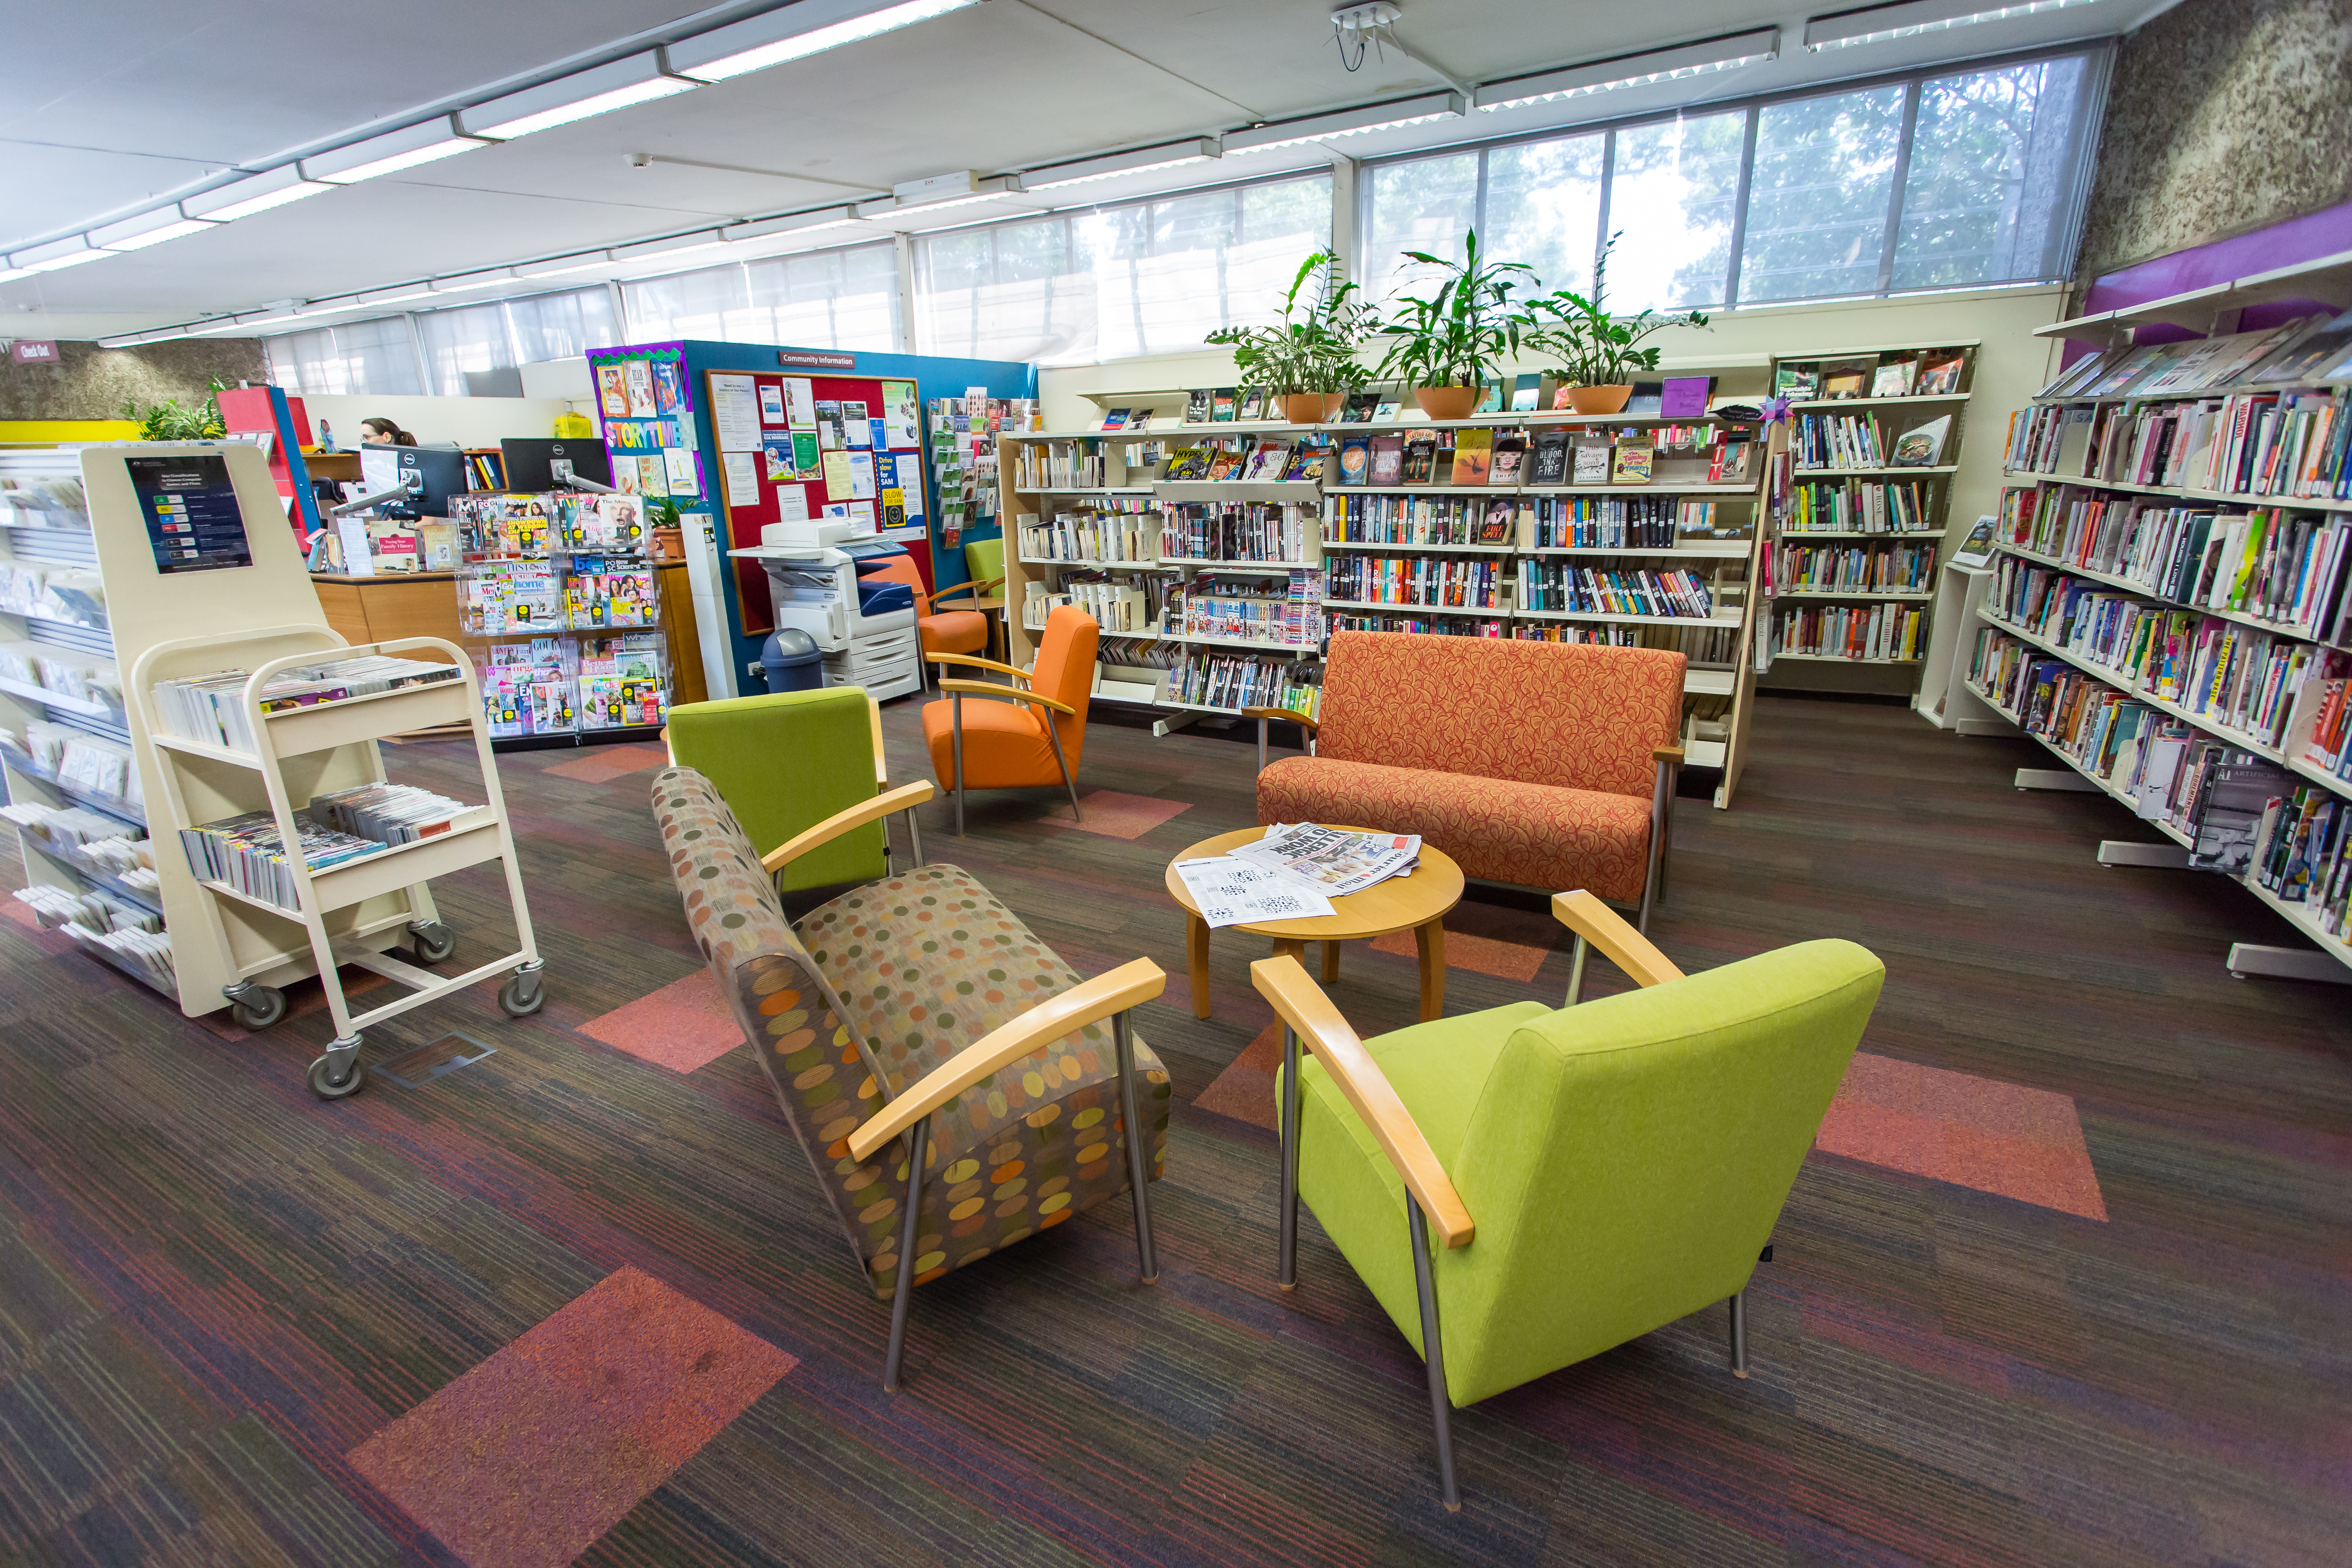 This is and image of the interior of the Local heritage place know as Annerley Library & Community centre